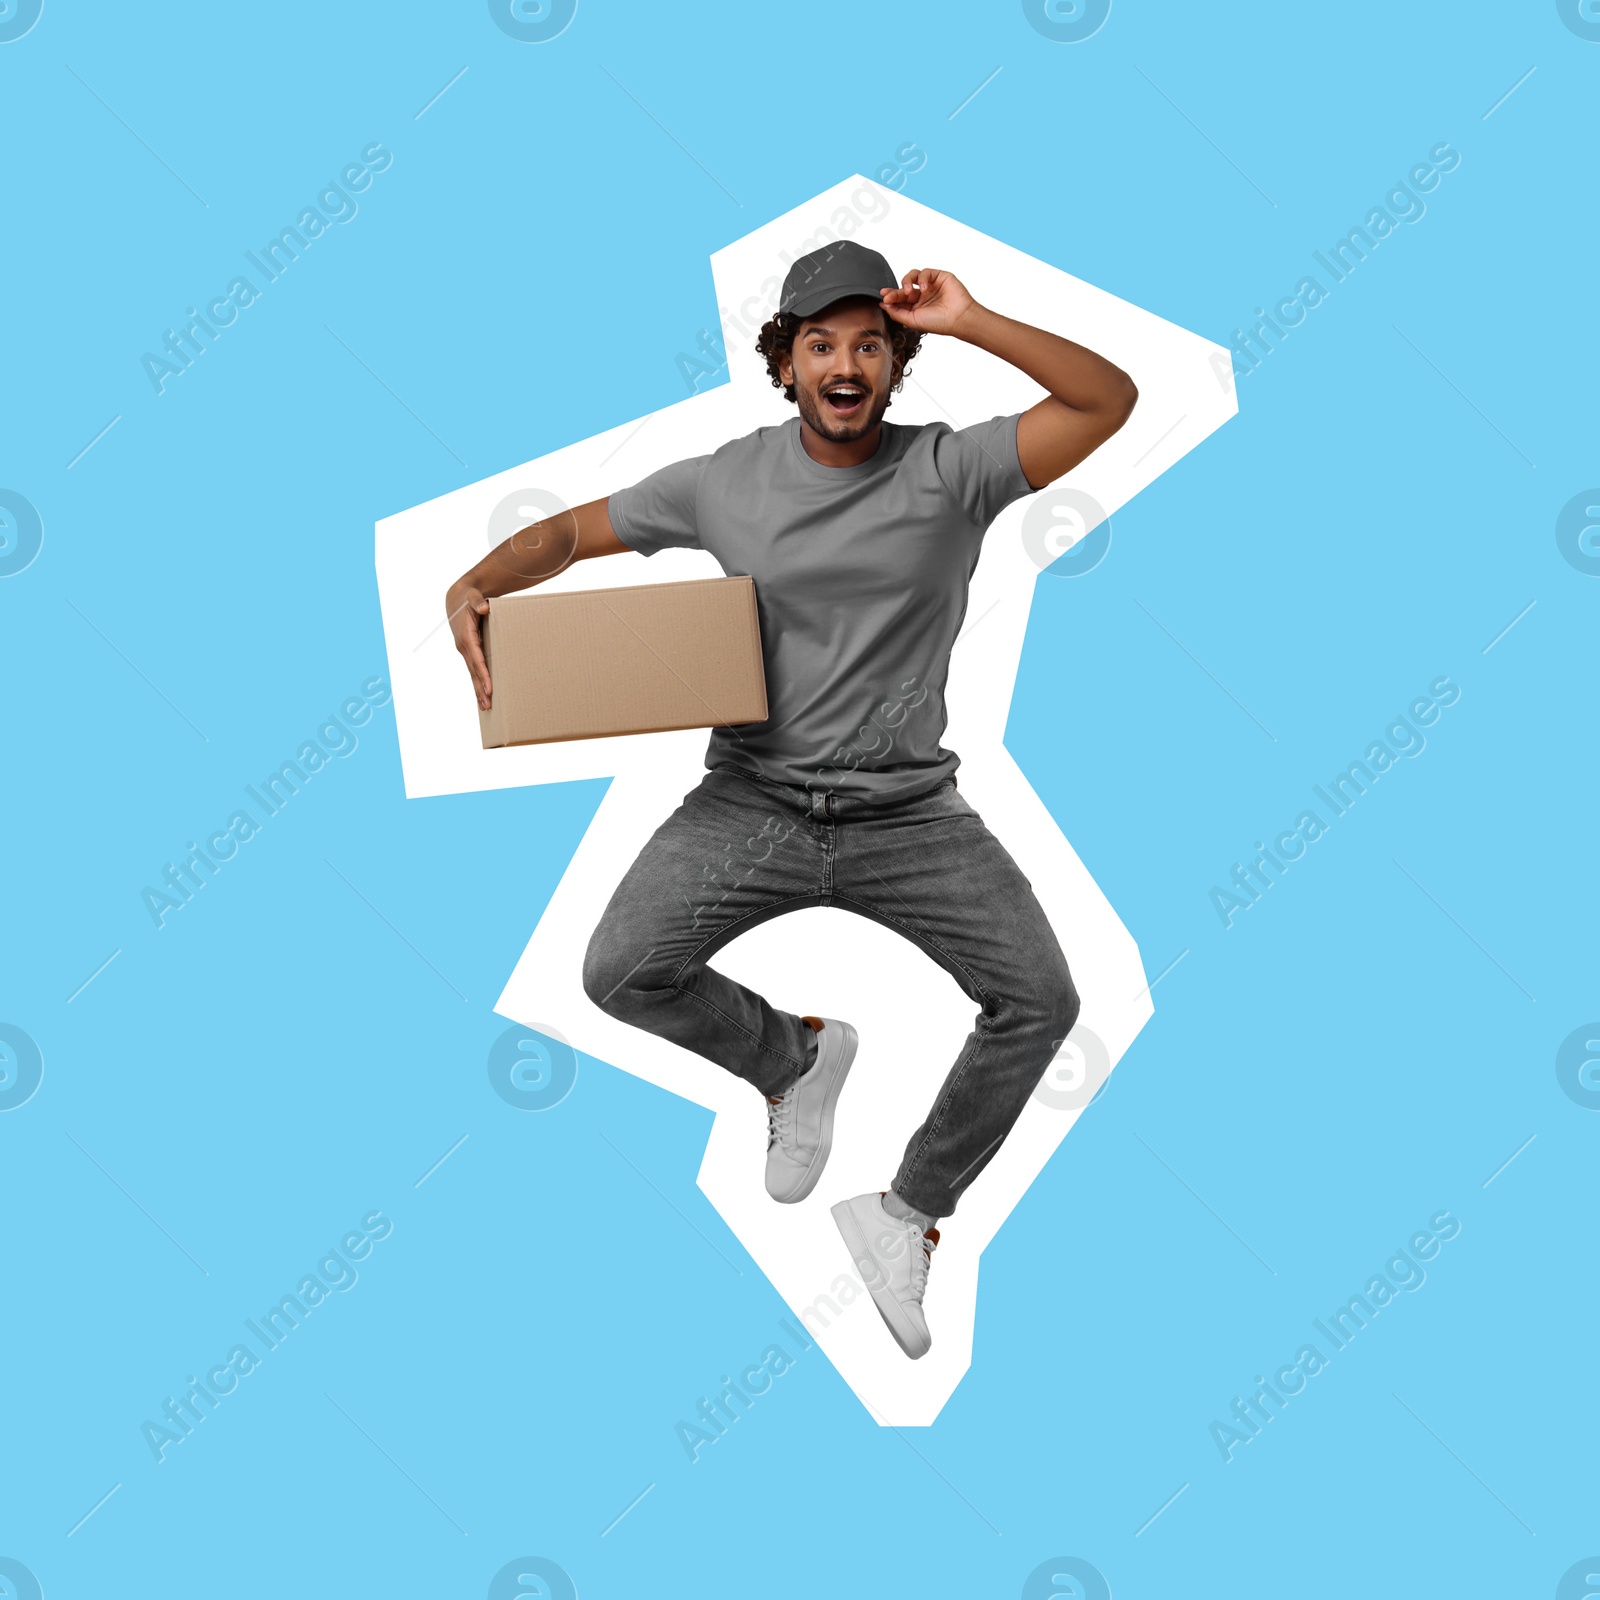 Image of Surprised courier with parcel jumping on light blue background